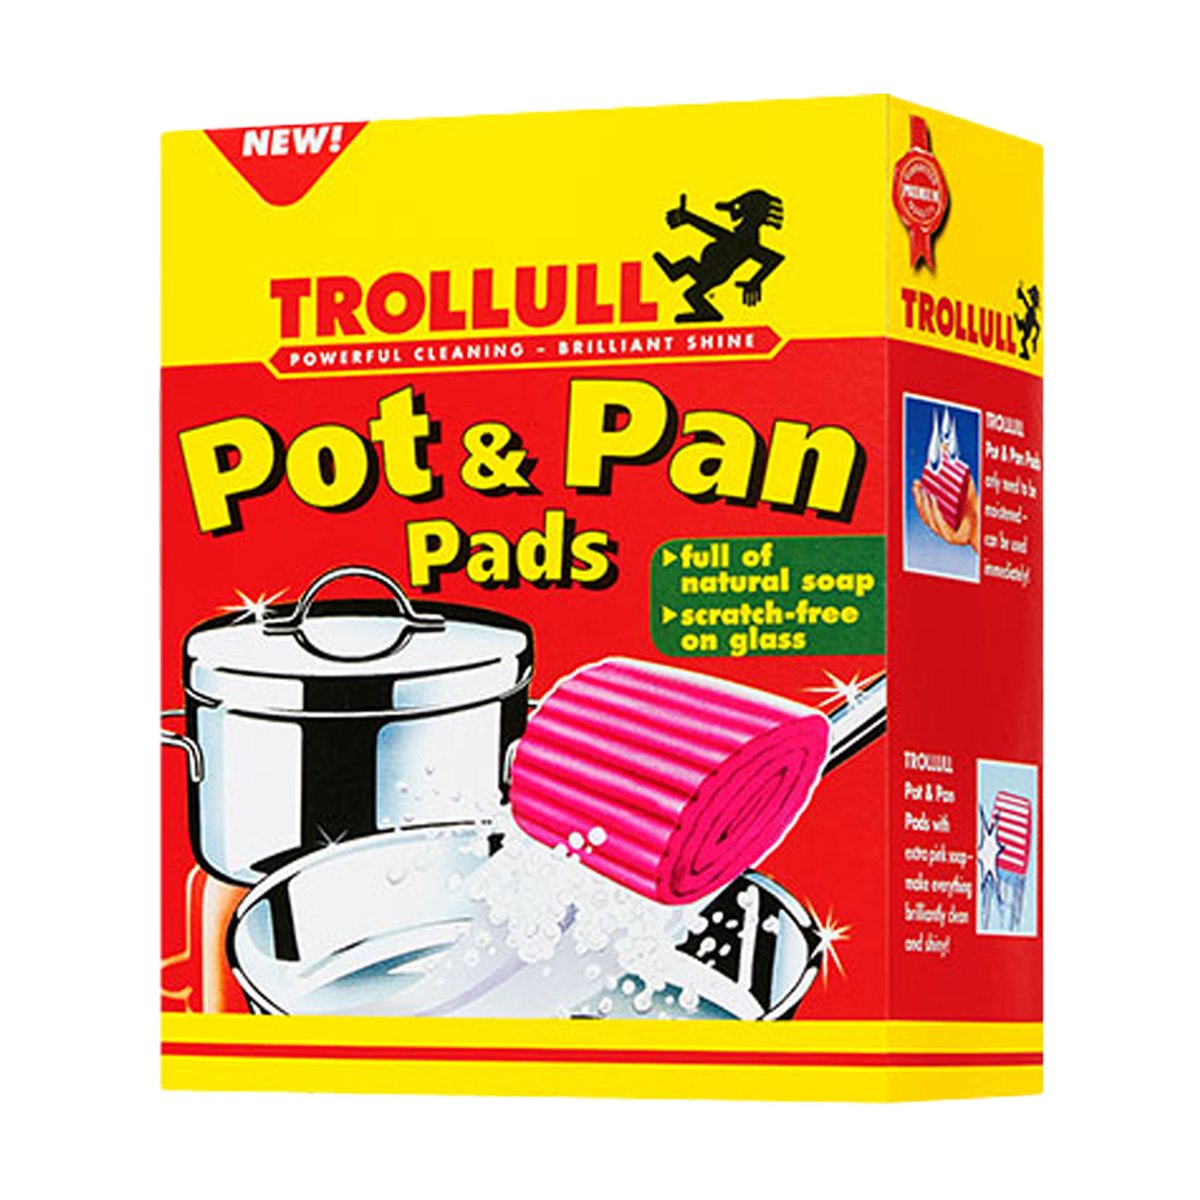 Trollull Pot and Pan Soap Pads